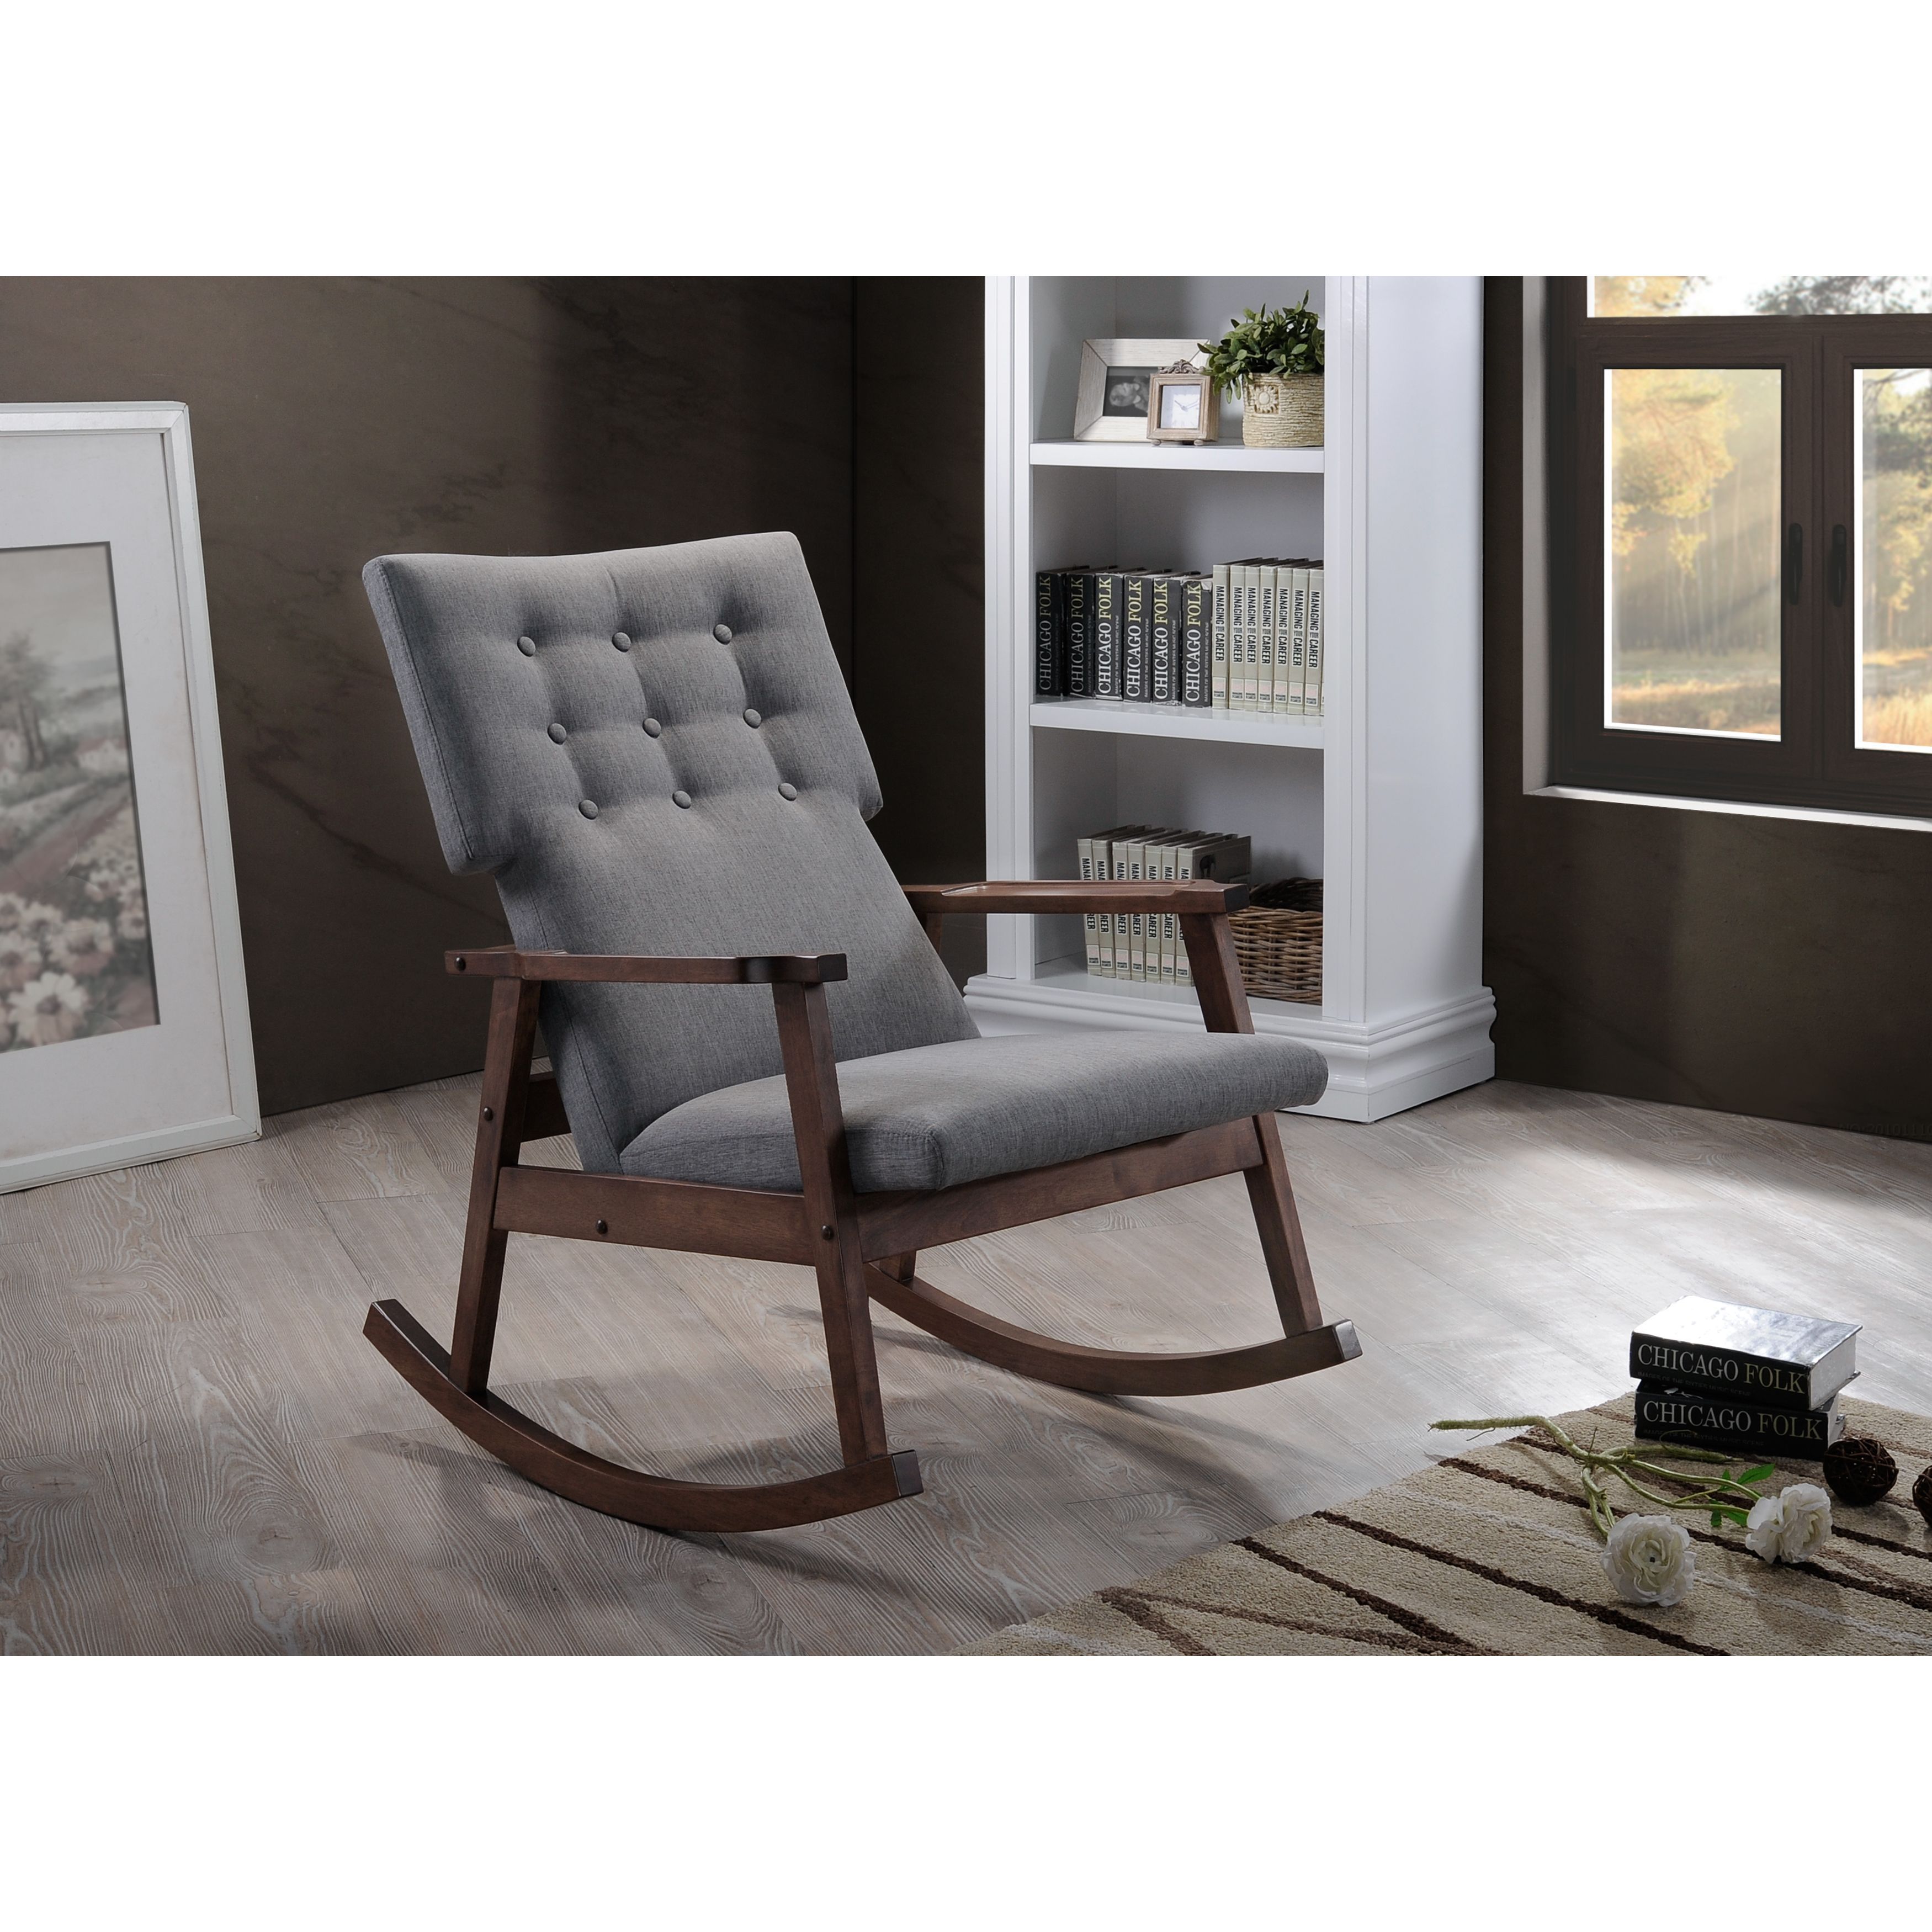 Featuring Scandinavian Style With Modern Aesthetic, The Throughout Granite Grey Fabric Mid Century Wooden Rocking Chairs (View 19 of 20)